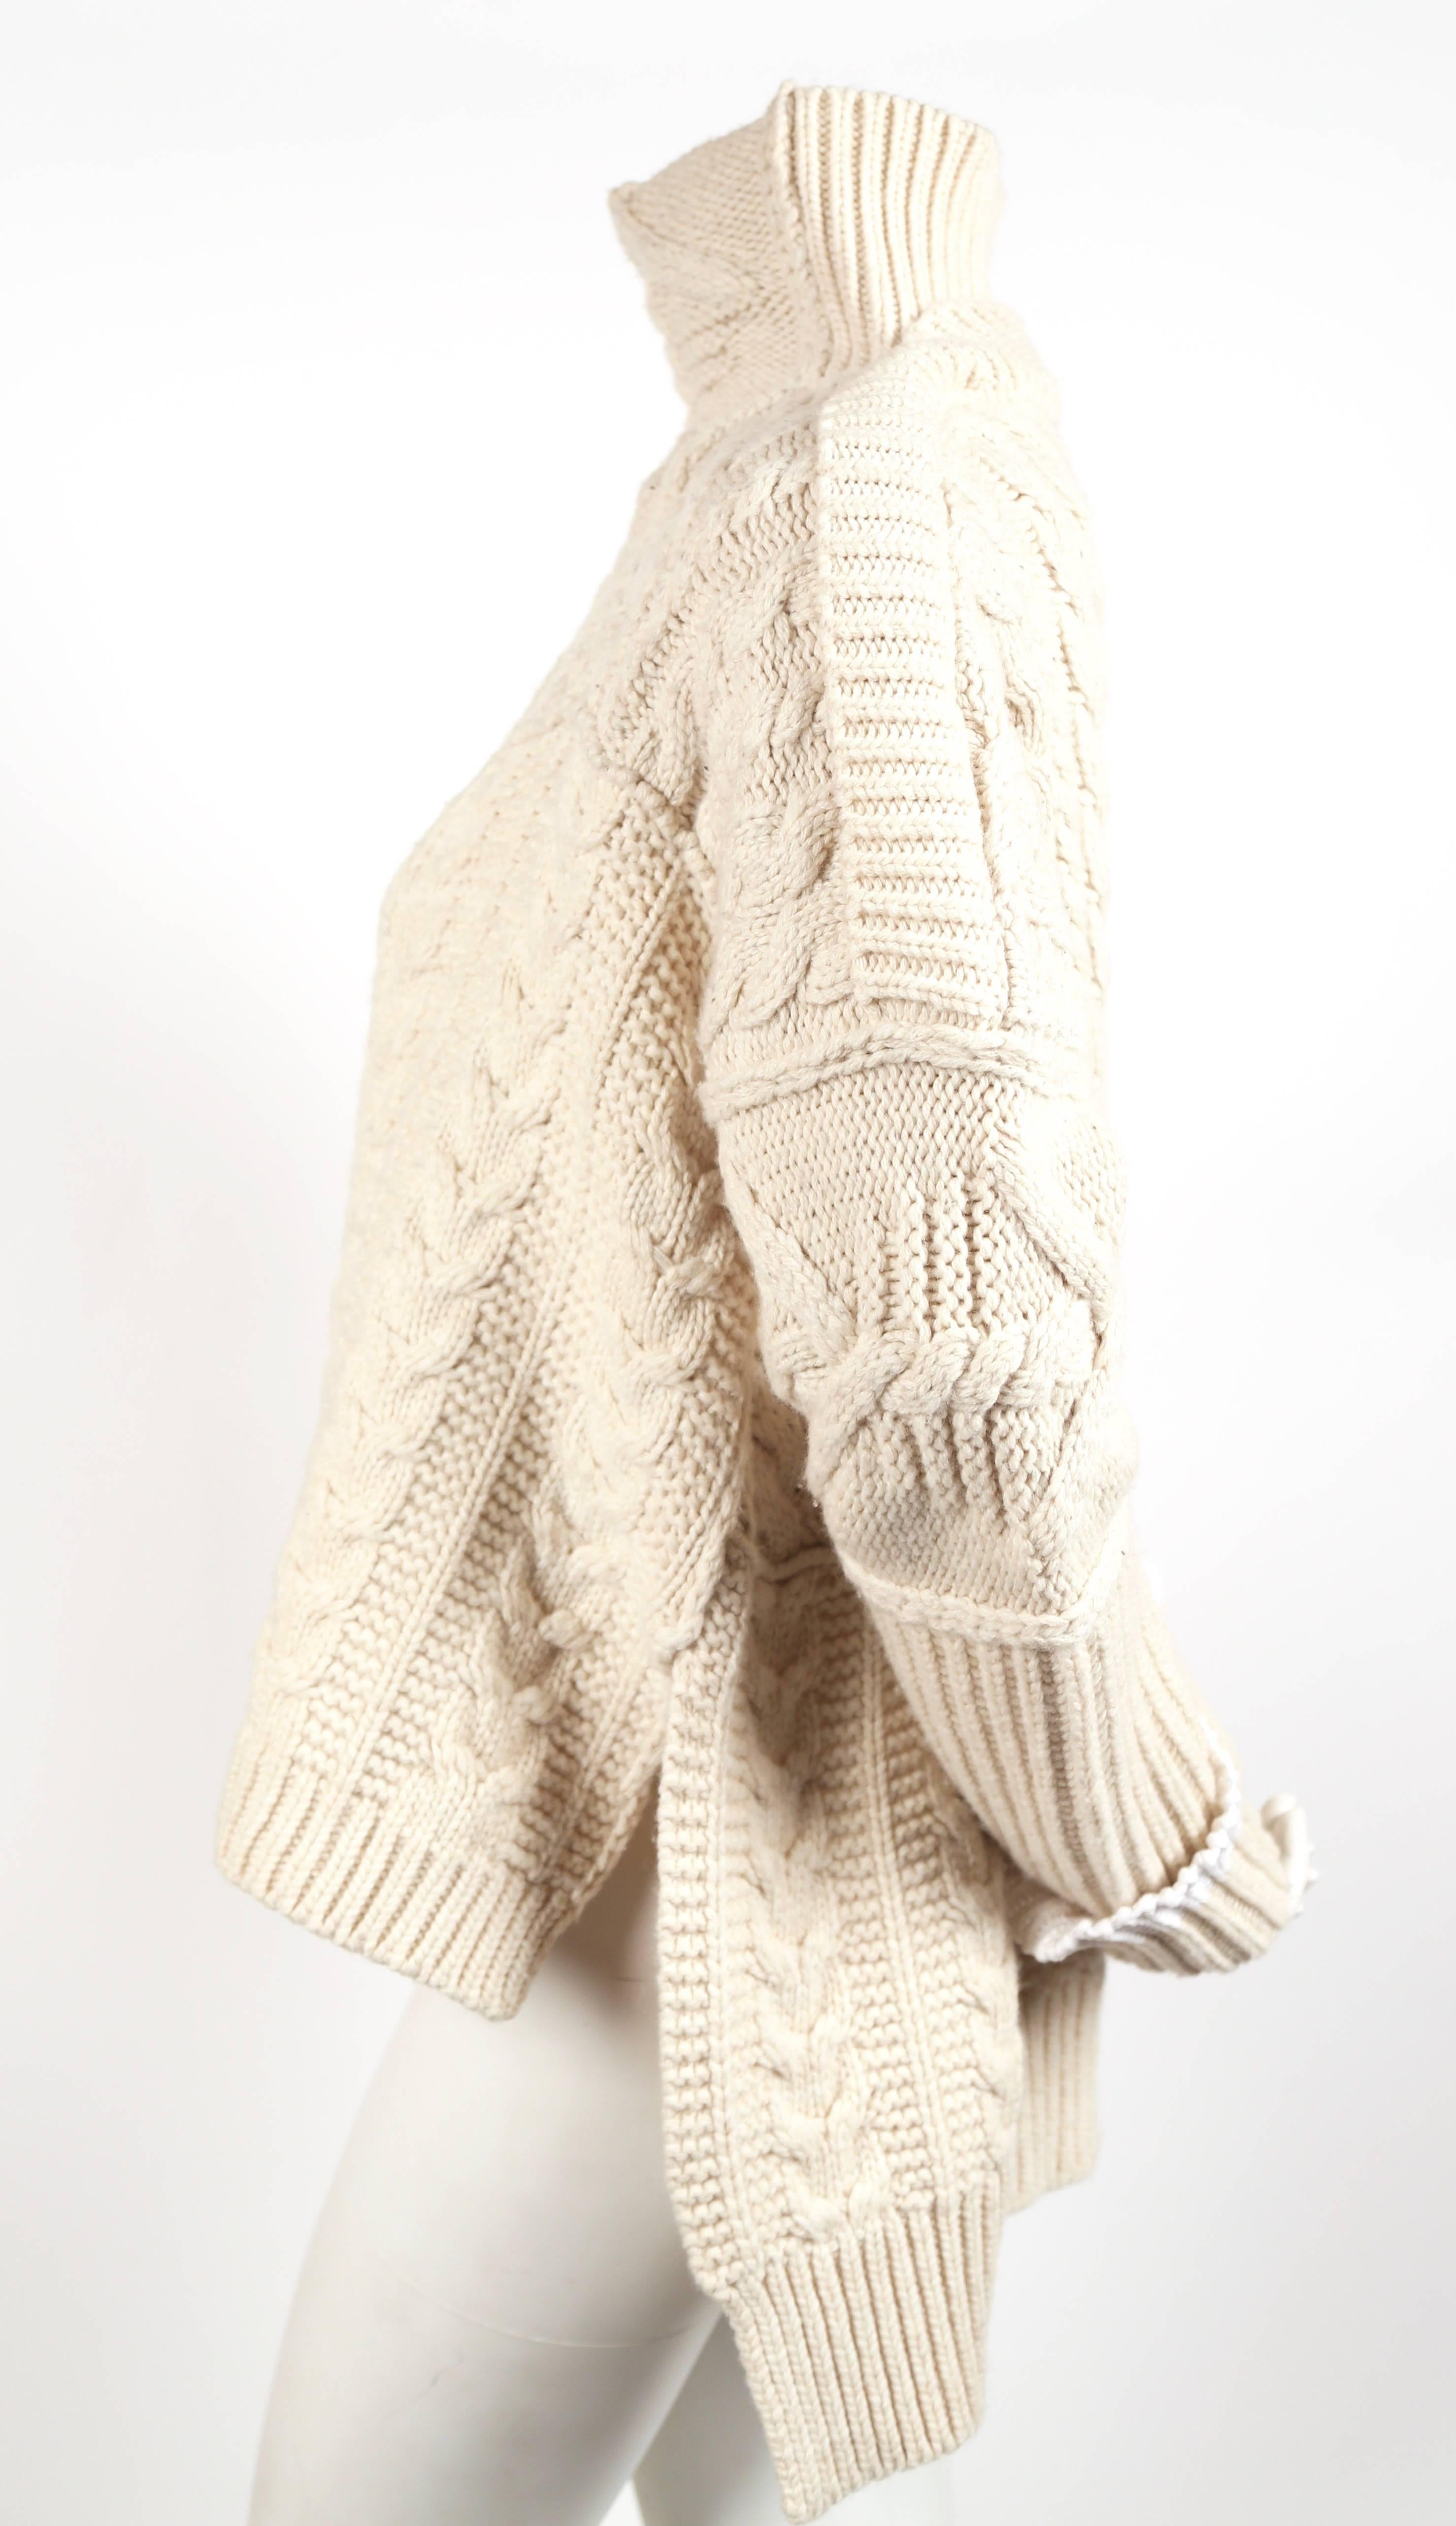 Cream cable knit wool sweater designed by Phoebe Philo for Celine dating to fall of 2010. French size 'S'. Approximate measurements: shoulder seam to shoulder seam (dropped shoulder cut) 30", bust 54", arm length from underarm to cuff